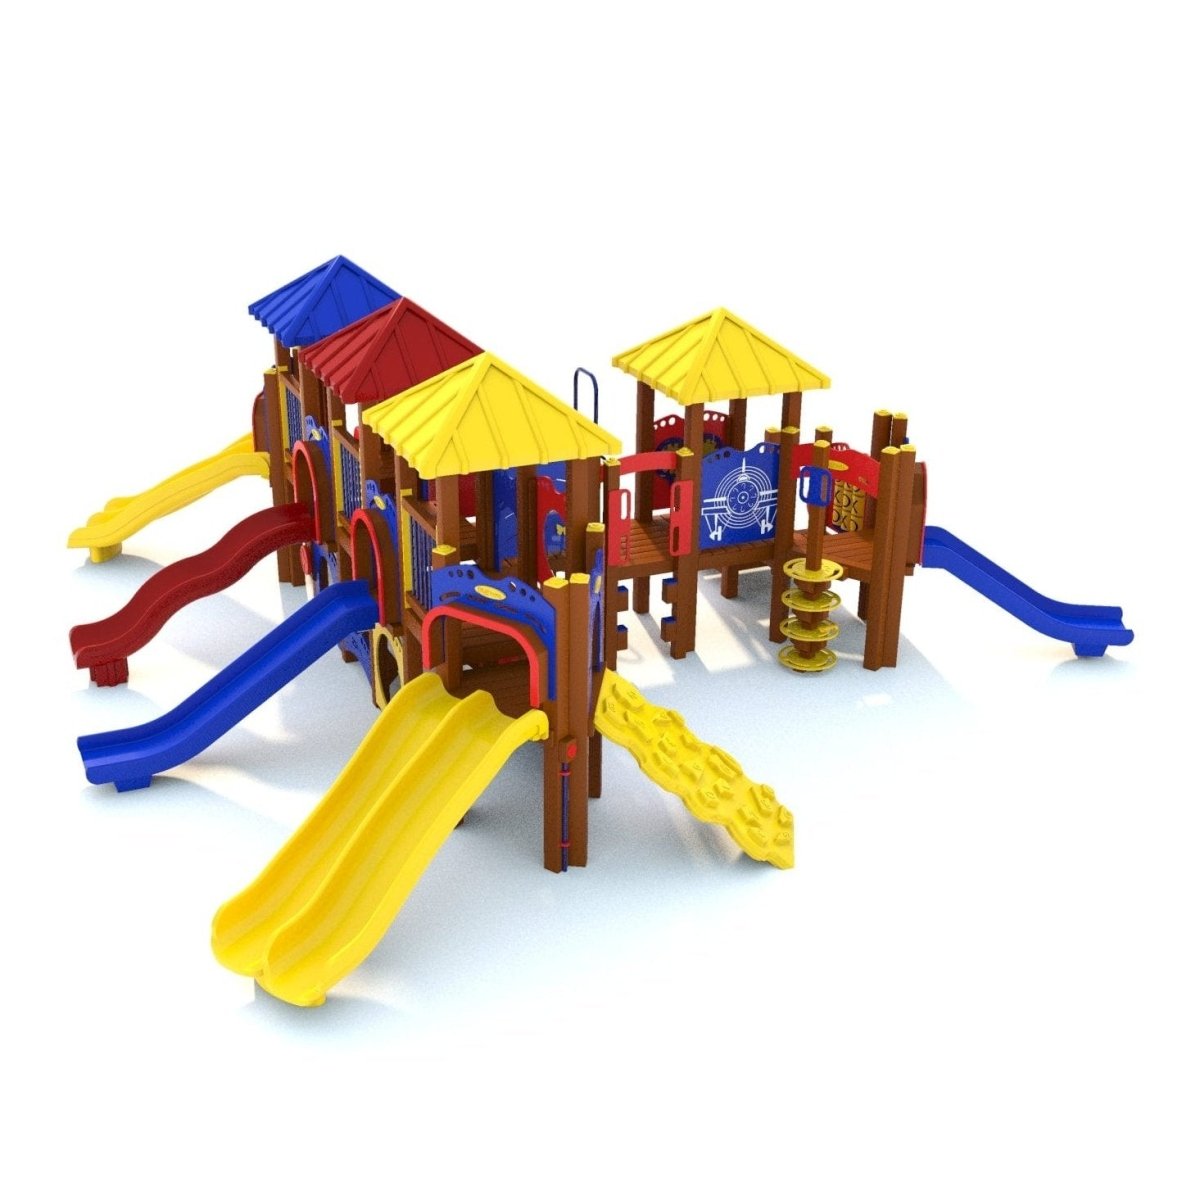 Canopy Capers Playset - Preschool Playgrounds - Playtopia, Inc.